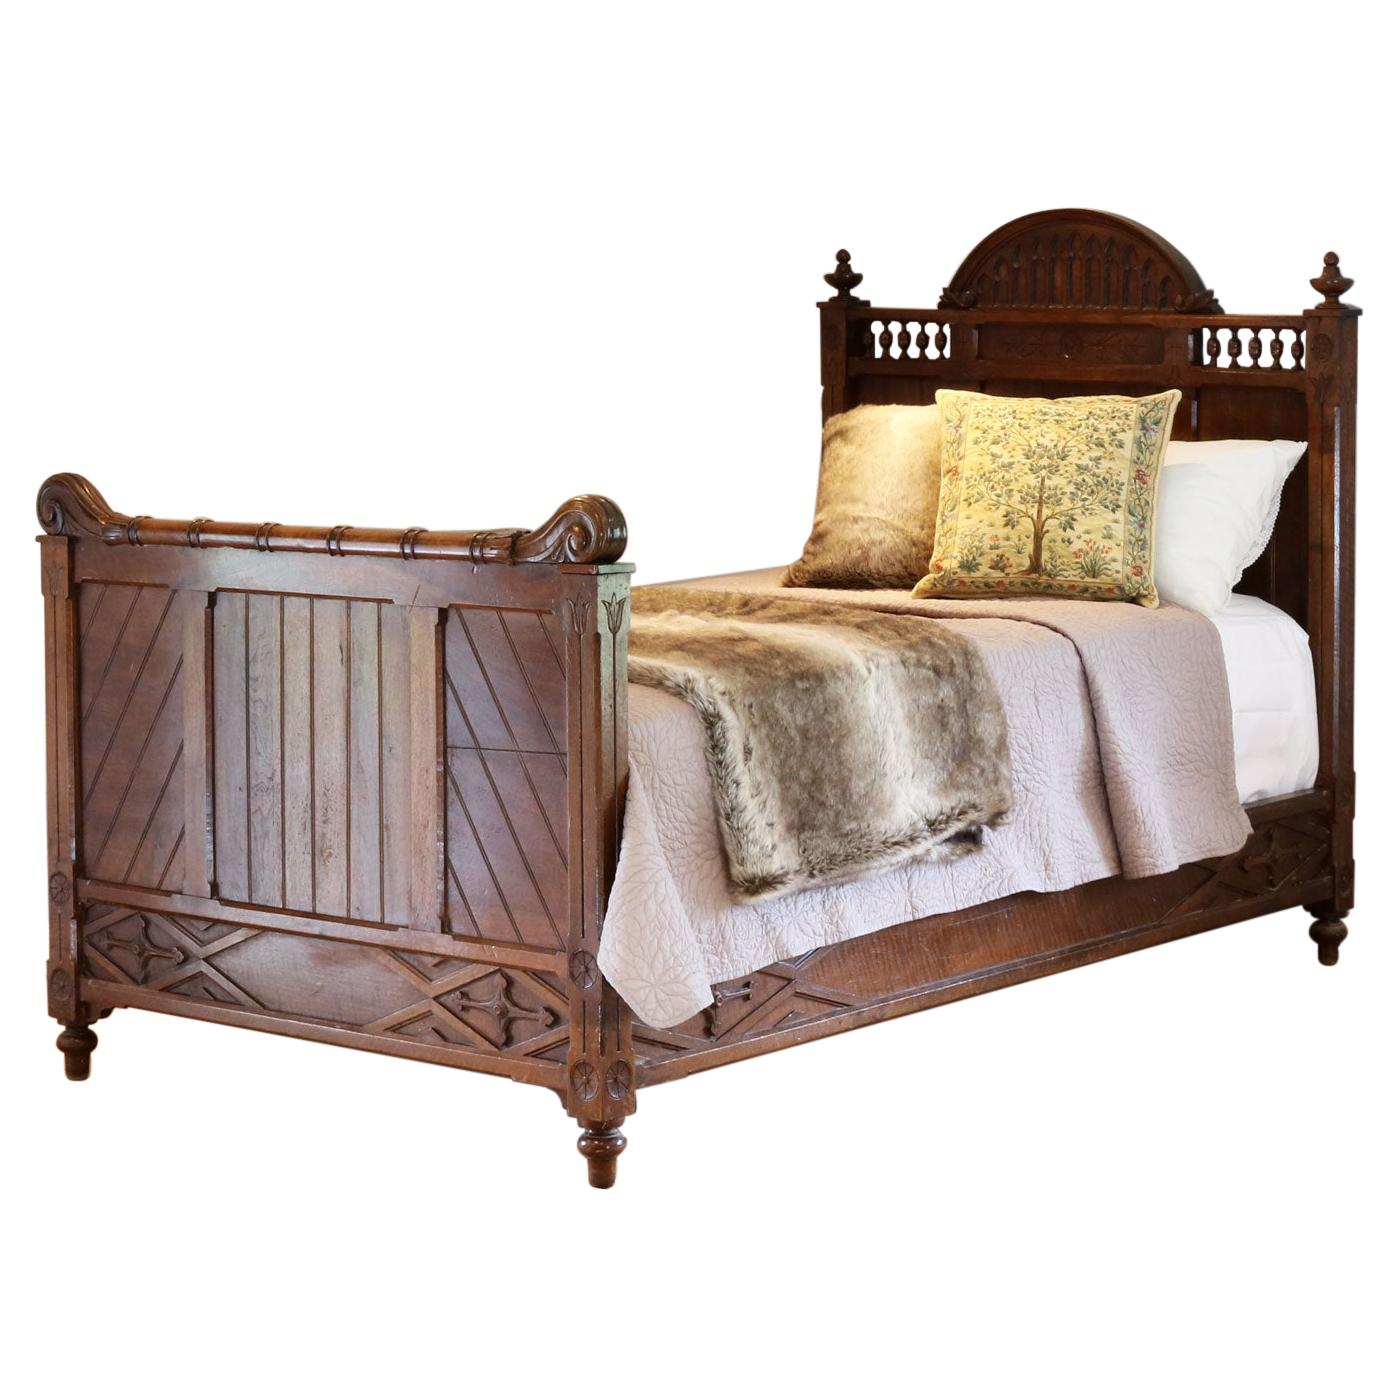 Gothic Style Single Walnut Antique Bed WS12 For Sale